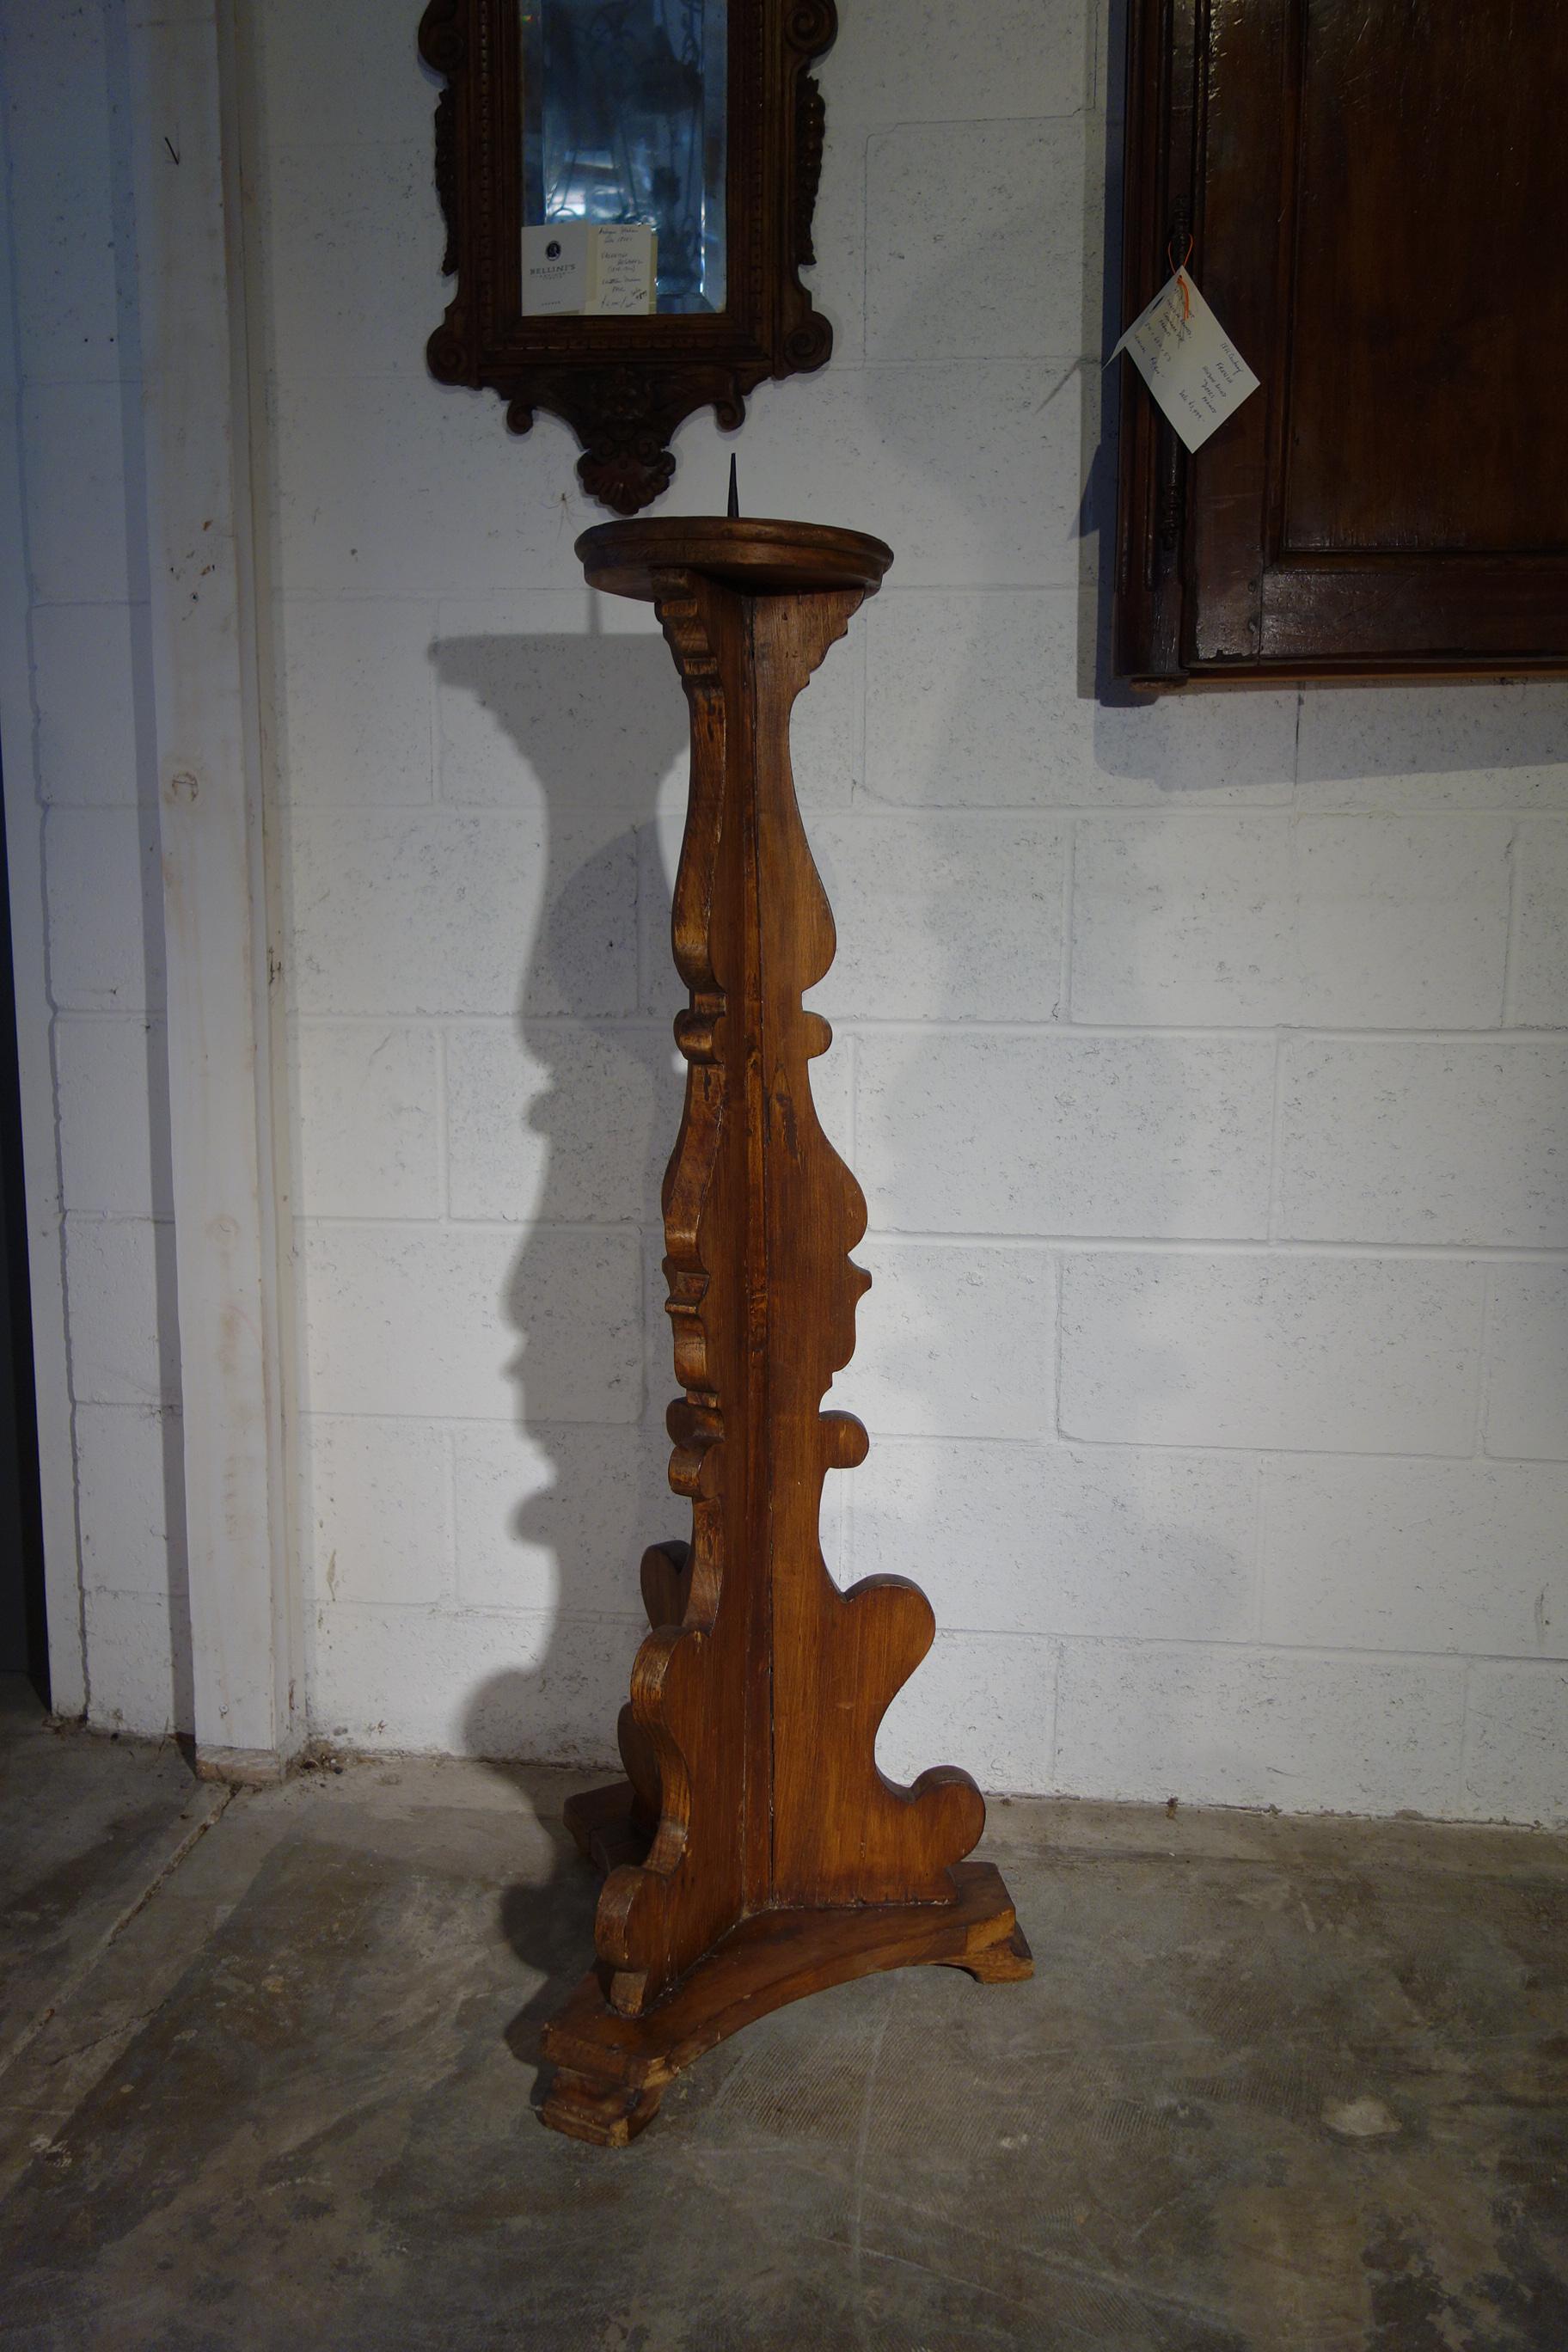 Tuscan refectory style single hand carved rustic candlelabra with forged nail spike.  Italian fruitwood. 

Dimension: 46